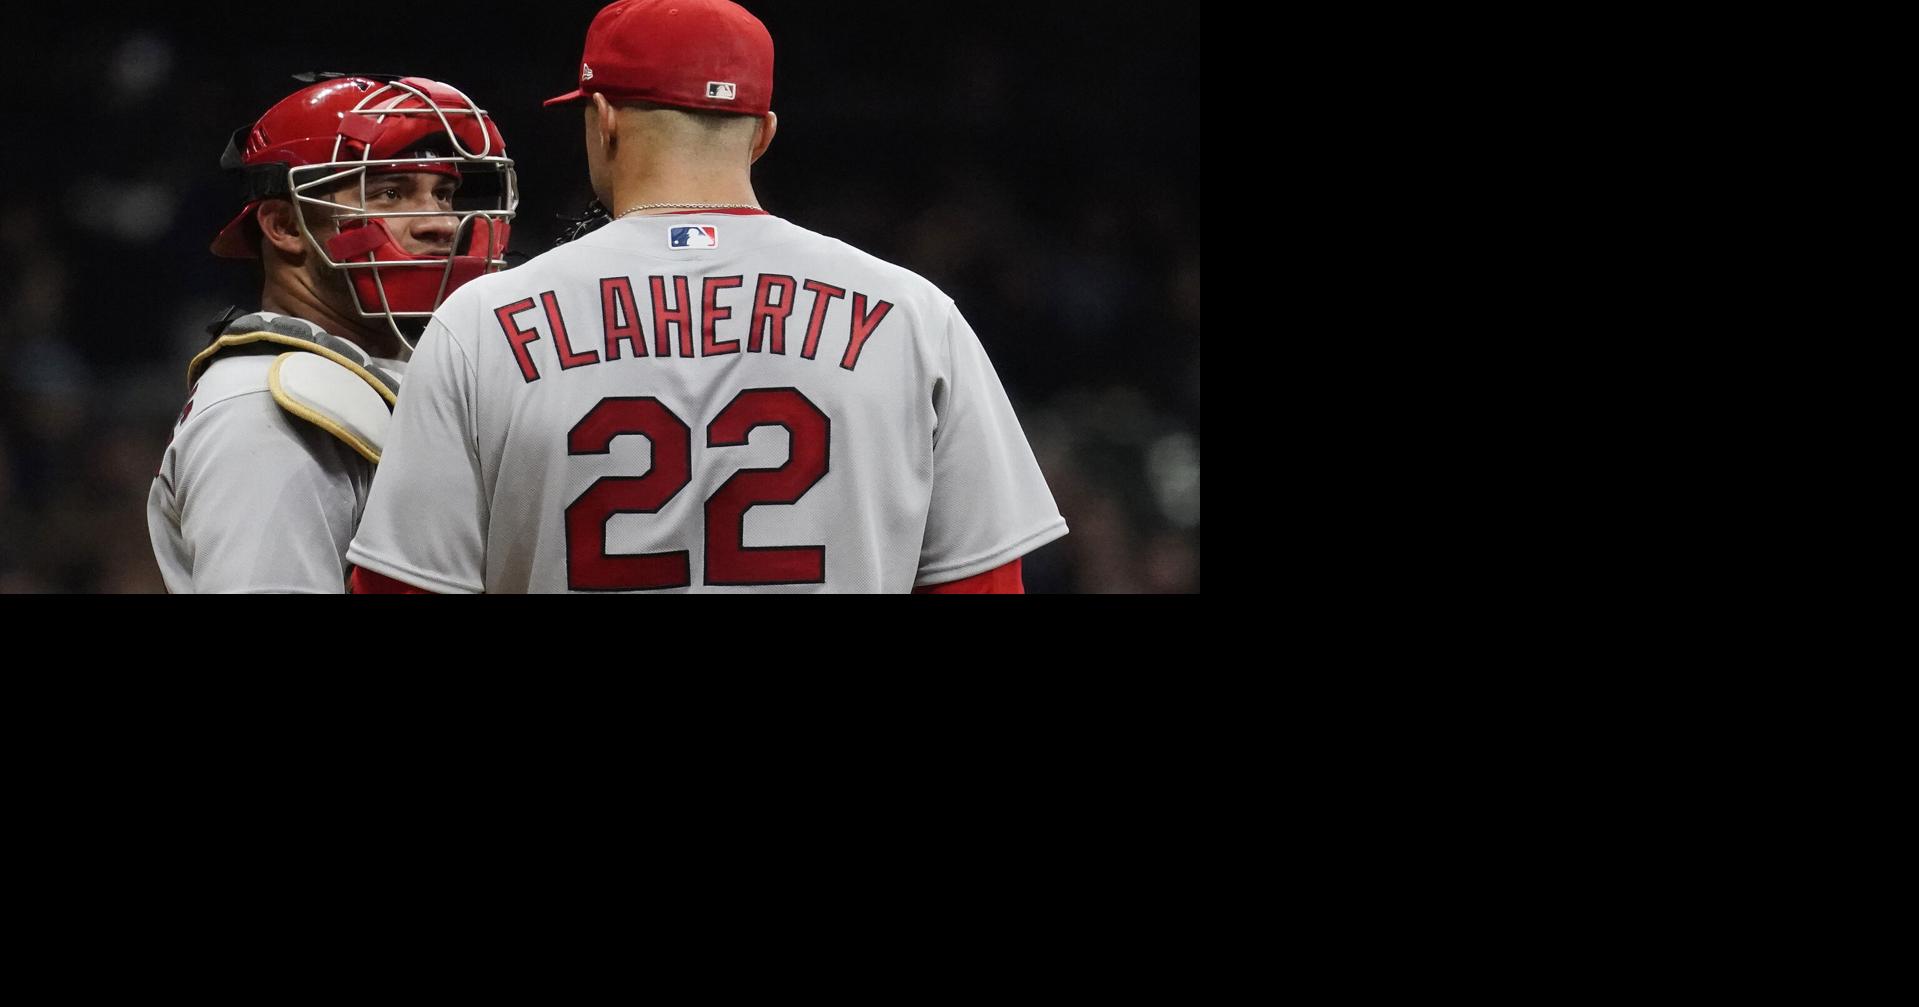 Jack Flaherty throws subtle shade at Cardinals after first Orioles home  start